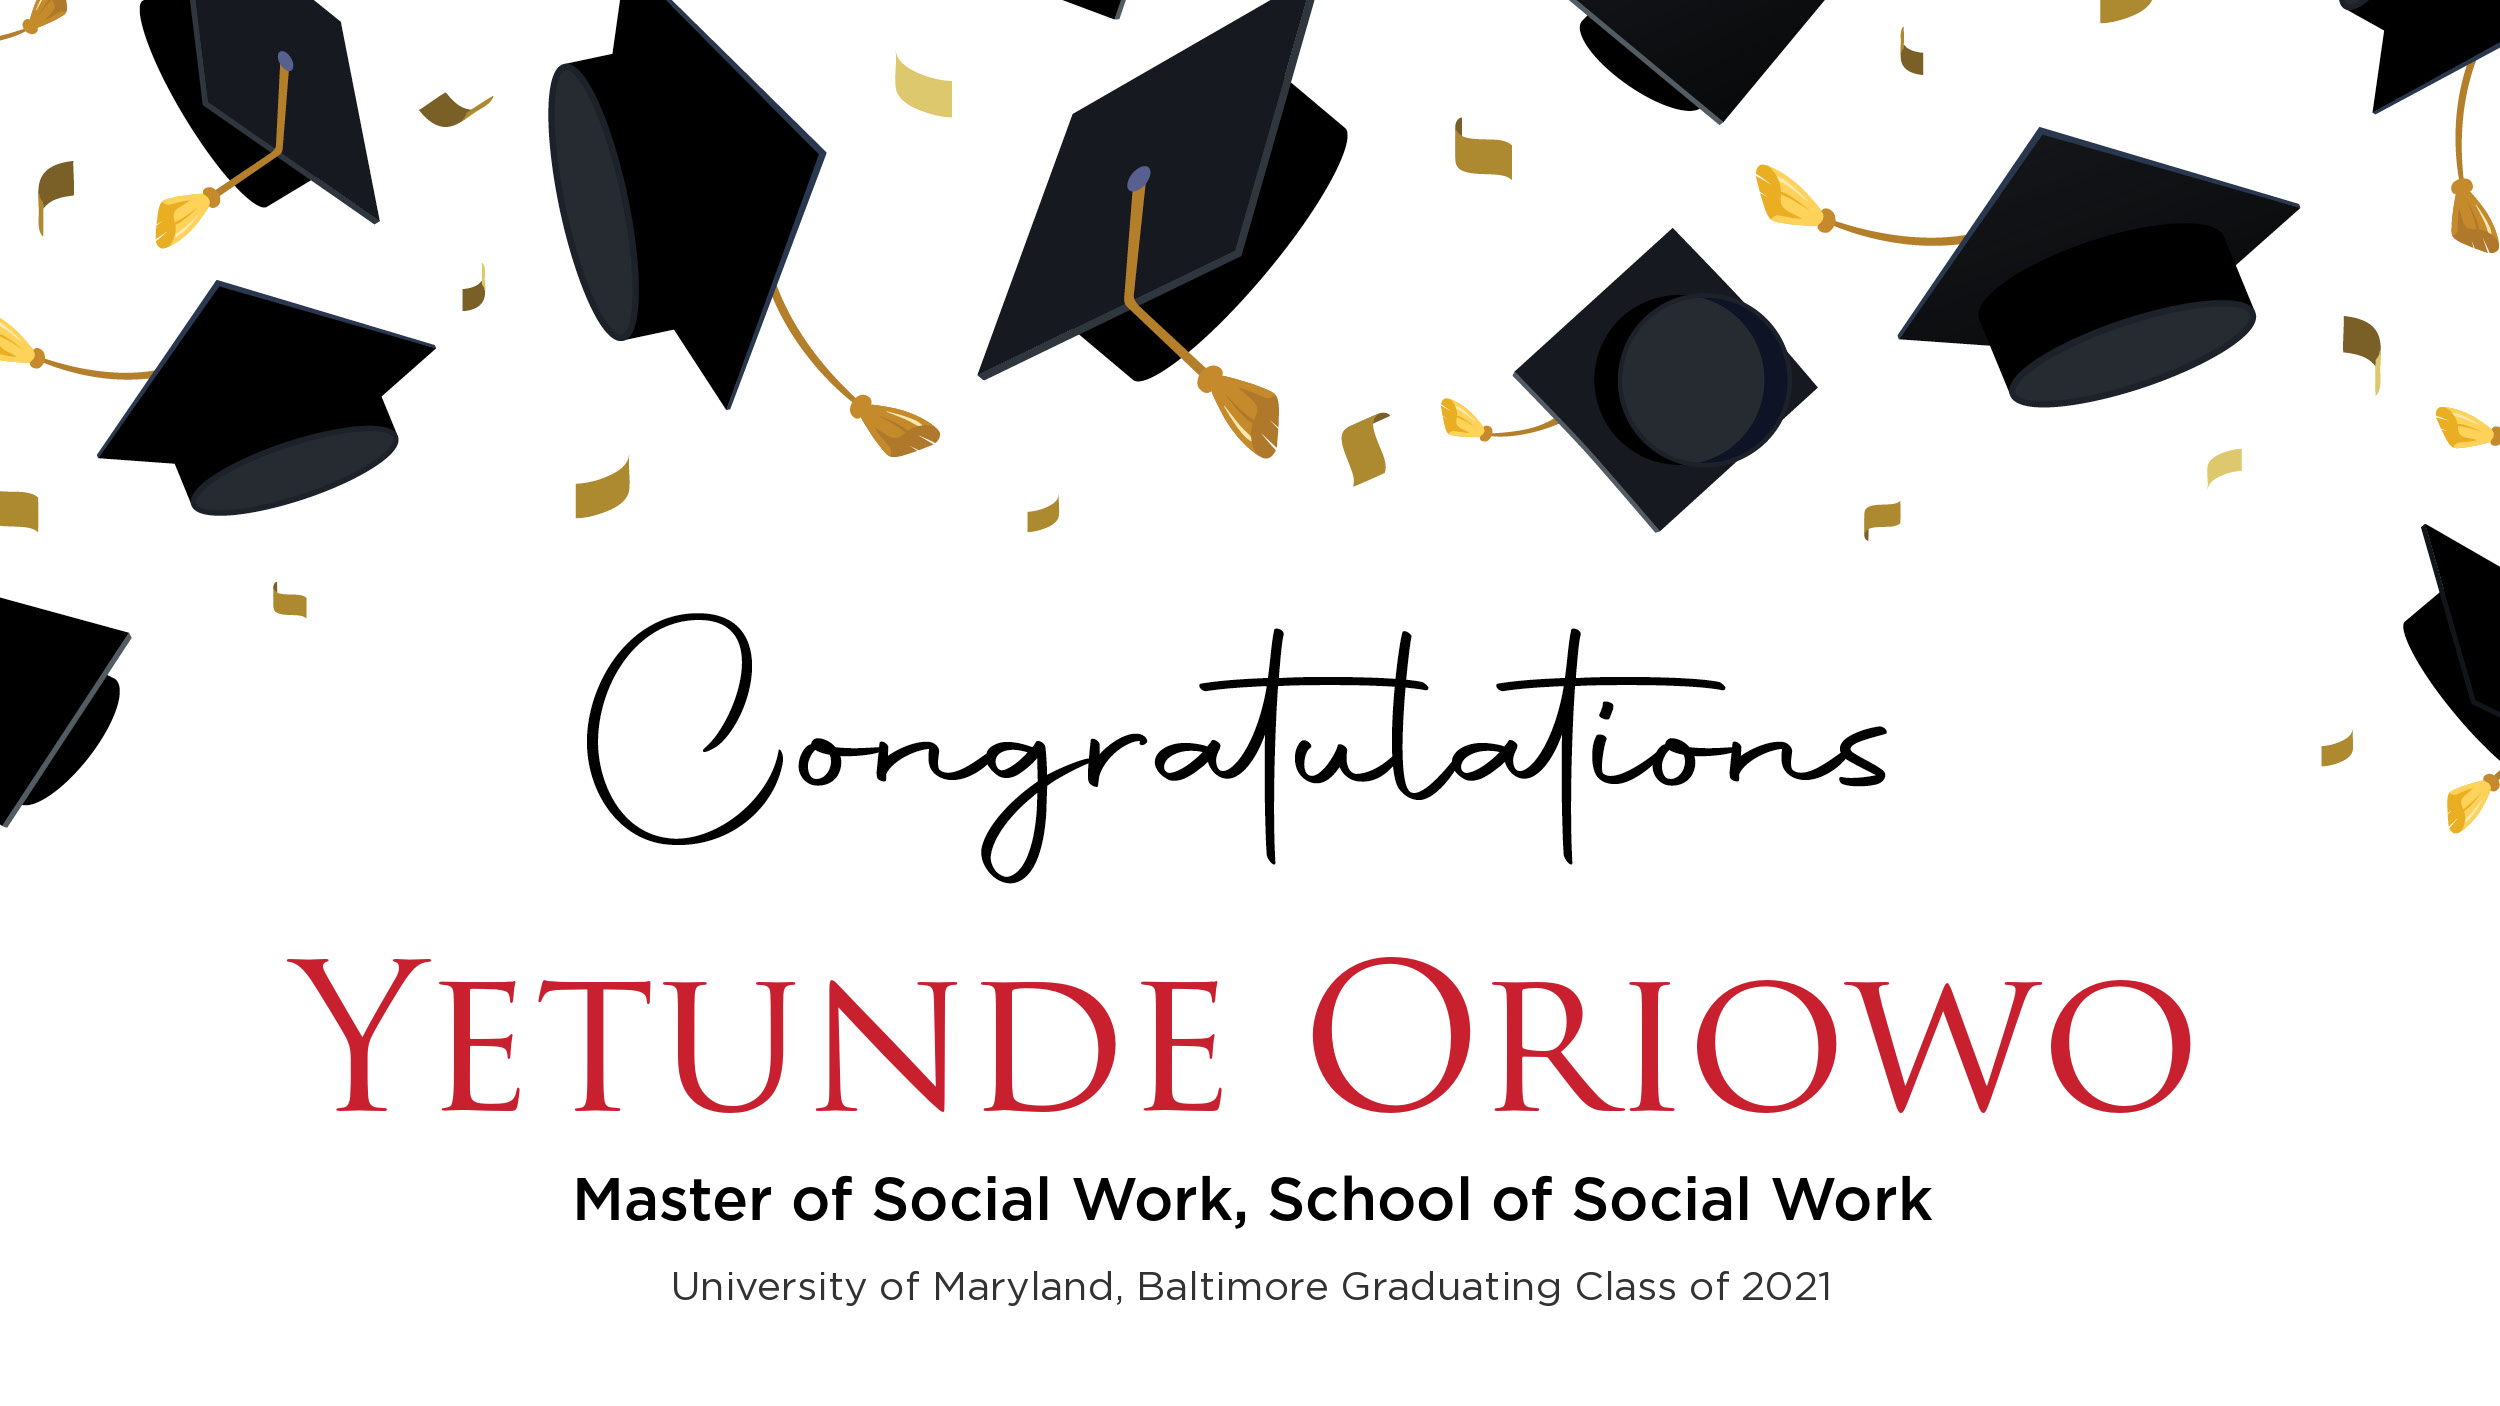 Congratulations Yetunde Oriowo, Master of Social Work